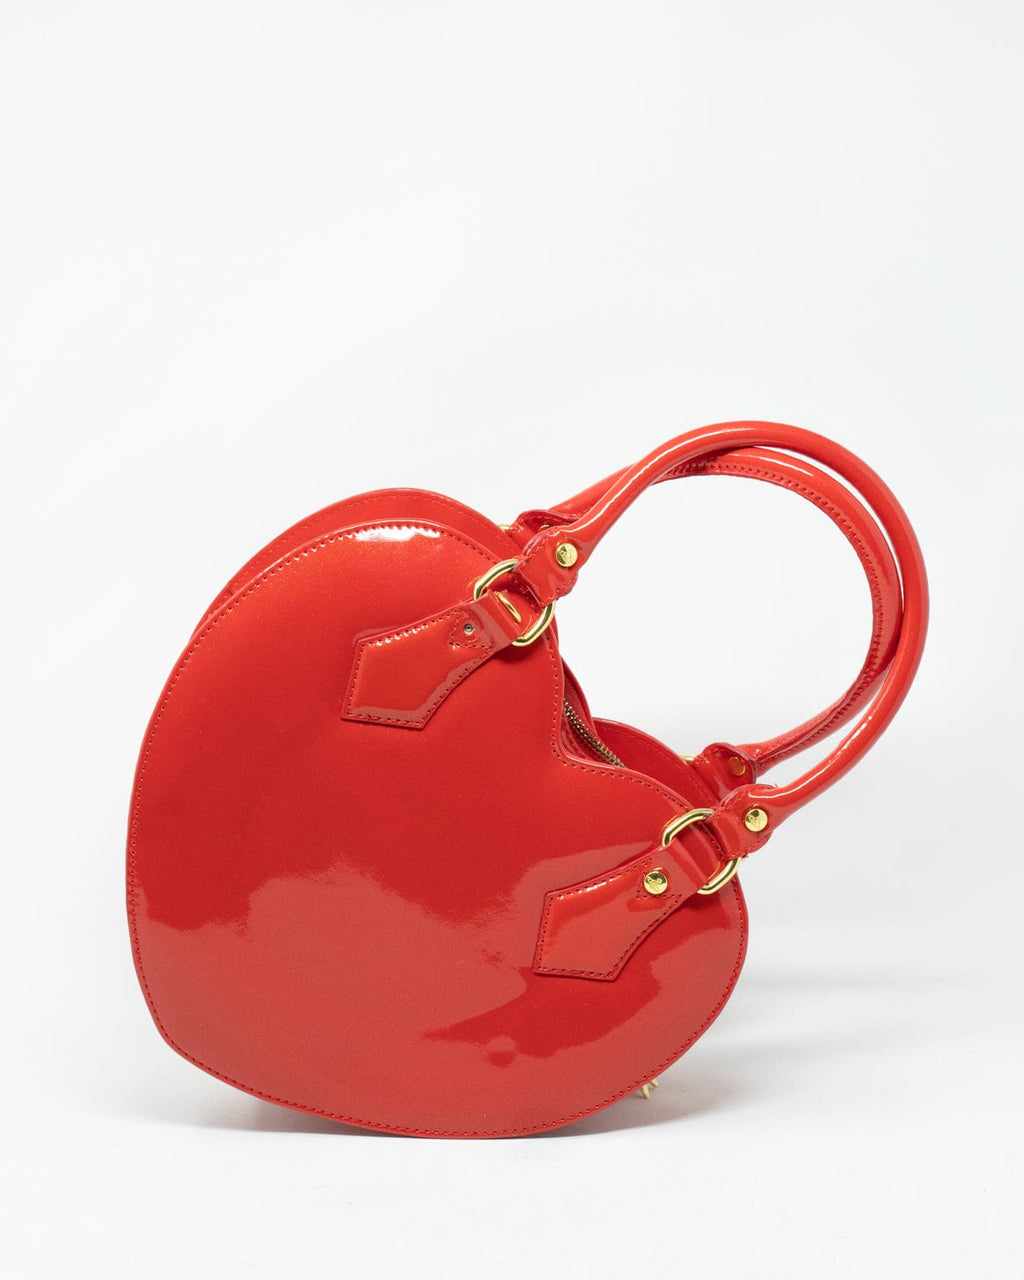 Vivienne Westwood Red Patent Leather Loveheart Bag GHW - AGL1889